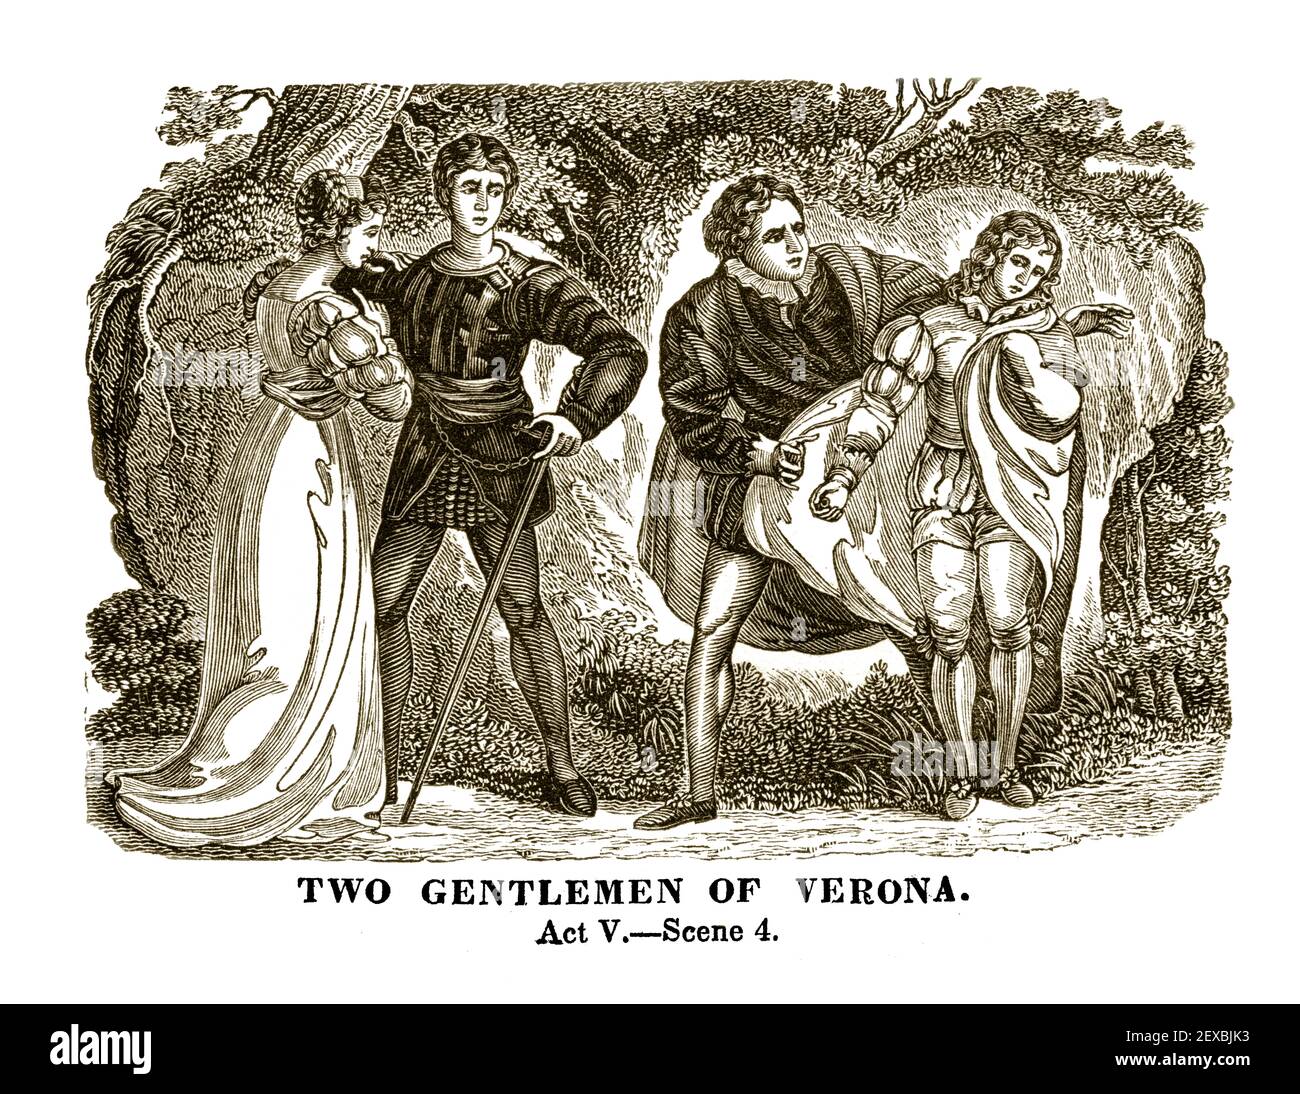 An 1834 engraving depicting a scene (Act V Scene 4) from William Shakespeare's play, 'Two Gentlemen of Verona', digitally colorized. Stock Photo